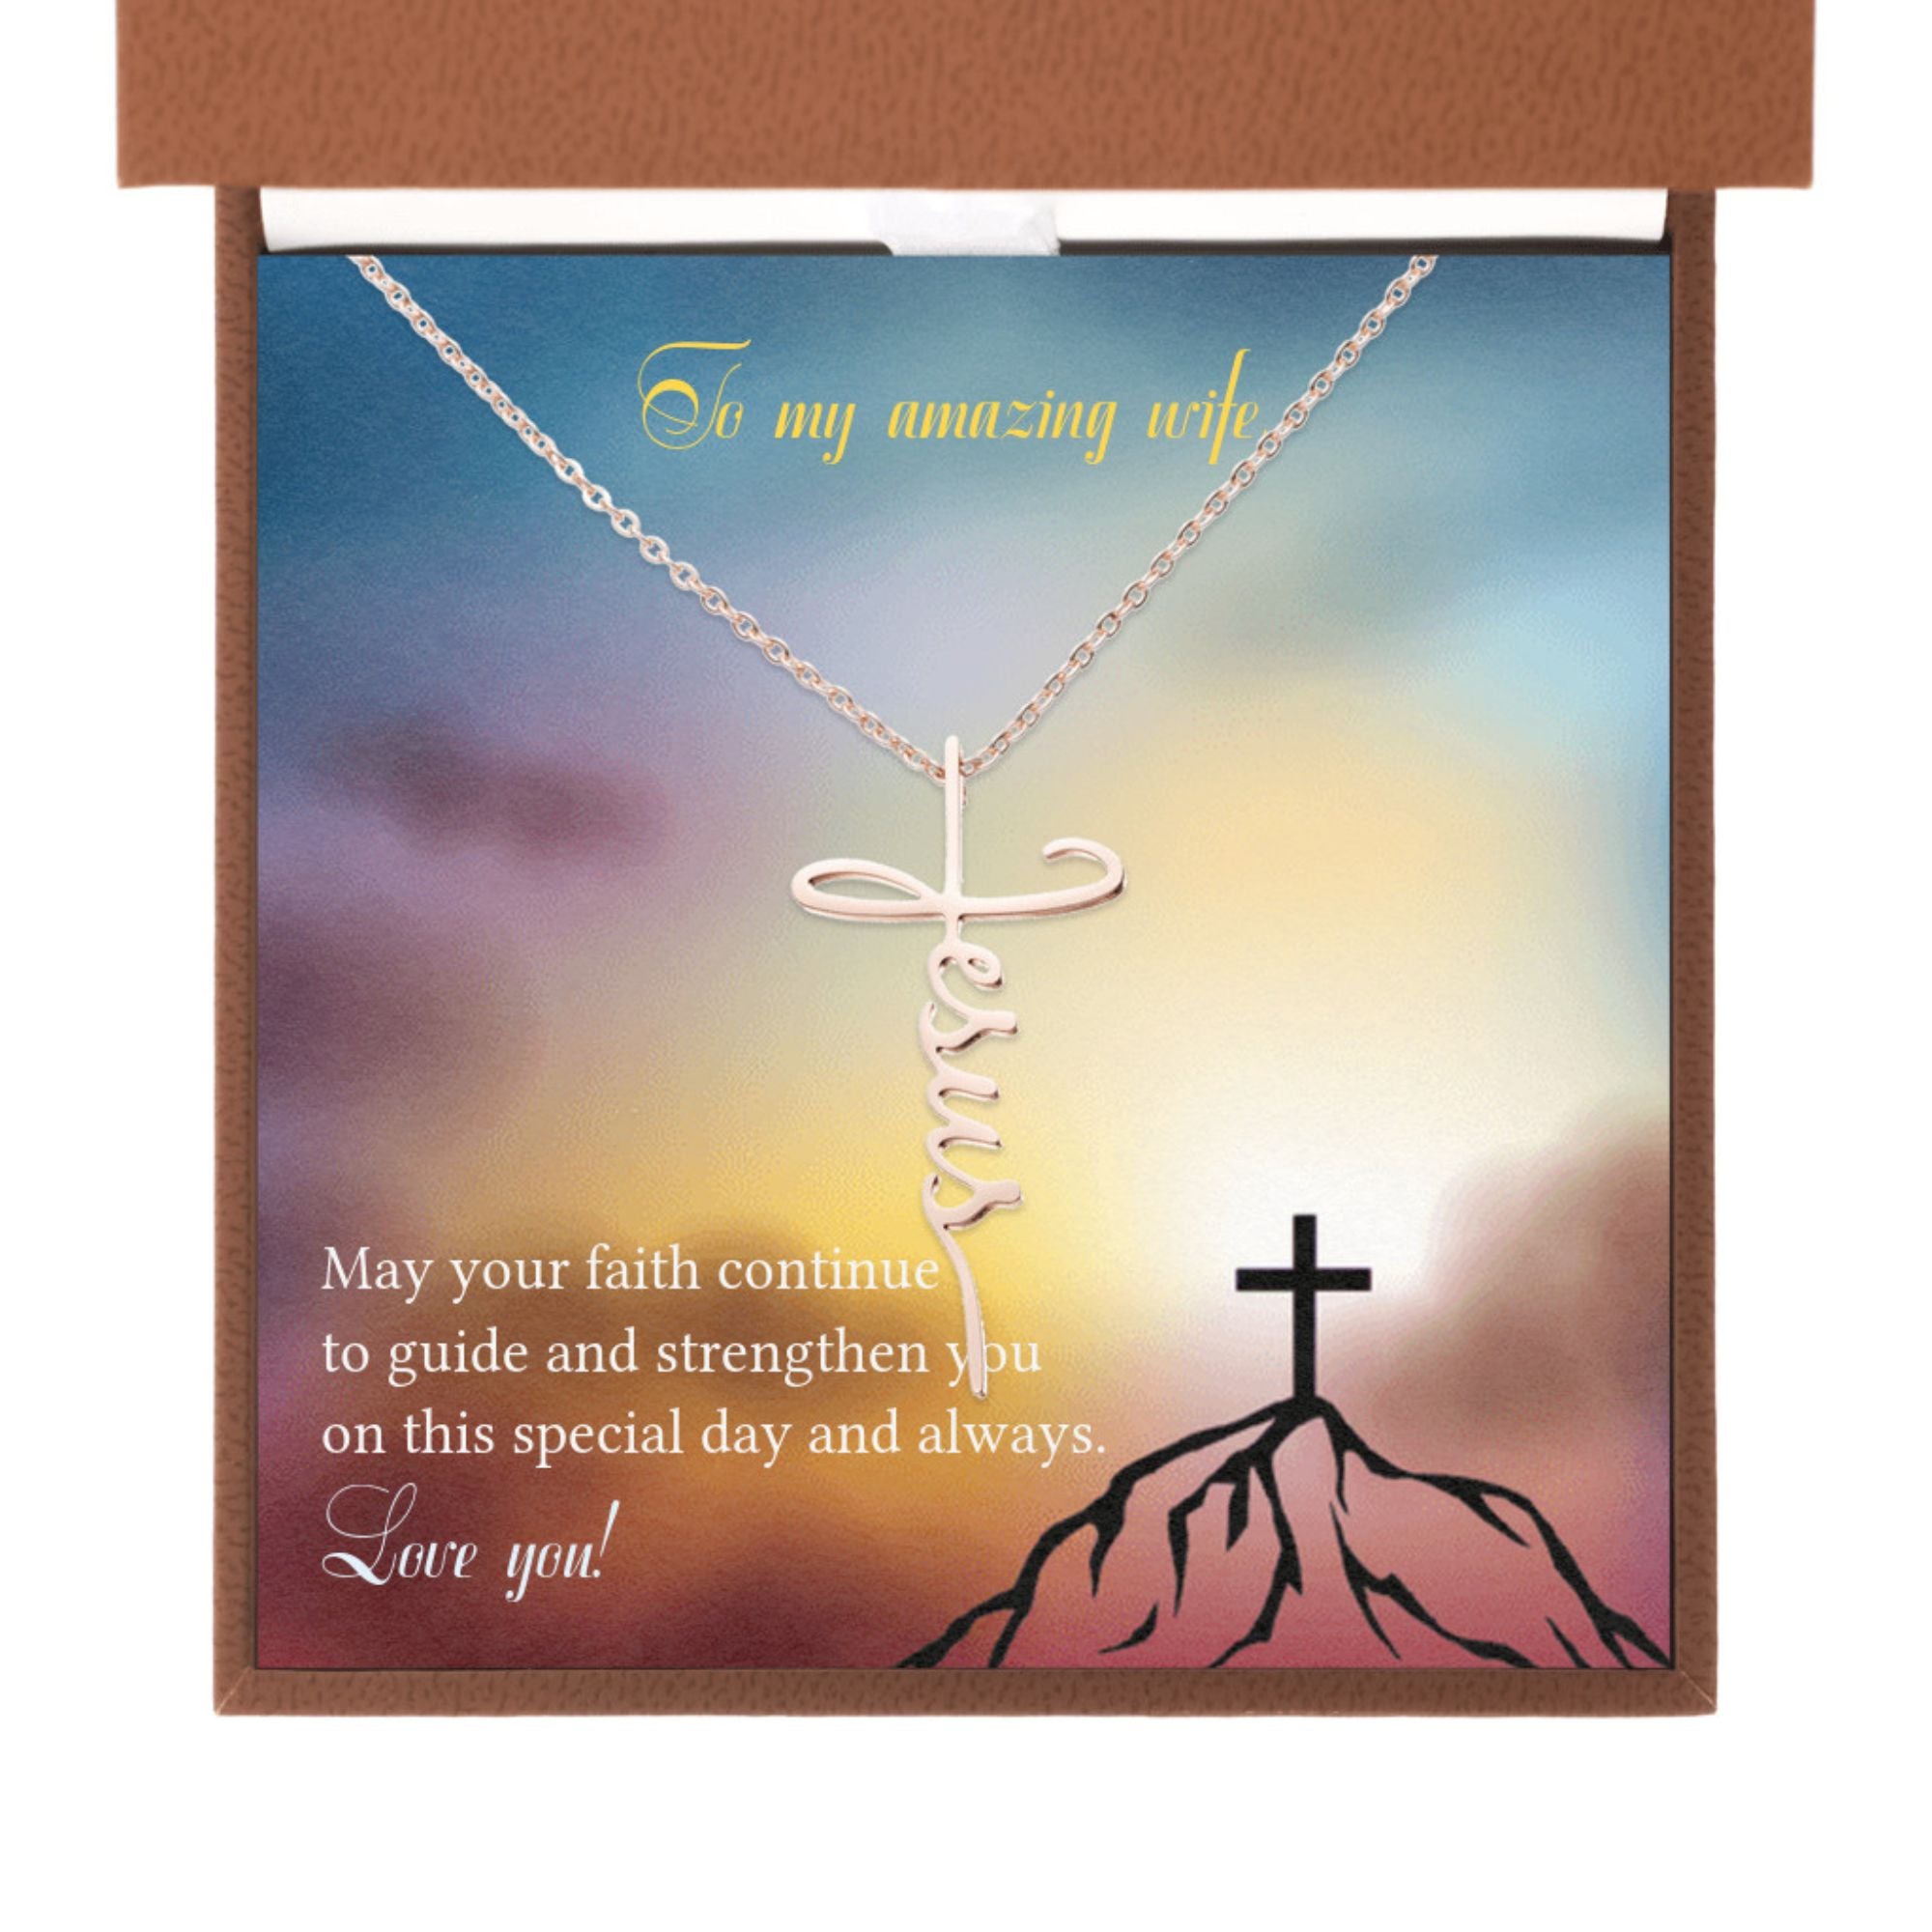 My Amazing Wife - I Am the Way - Jesus Cross Necklace Box Type: Brown Leather Box Finish: 18K Rose Gold Plated Jesus Passion Apparel